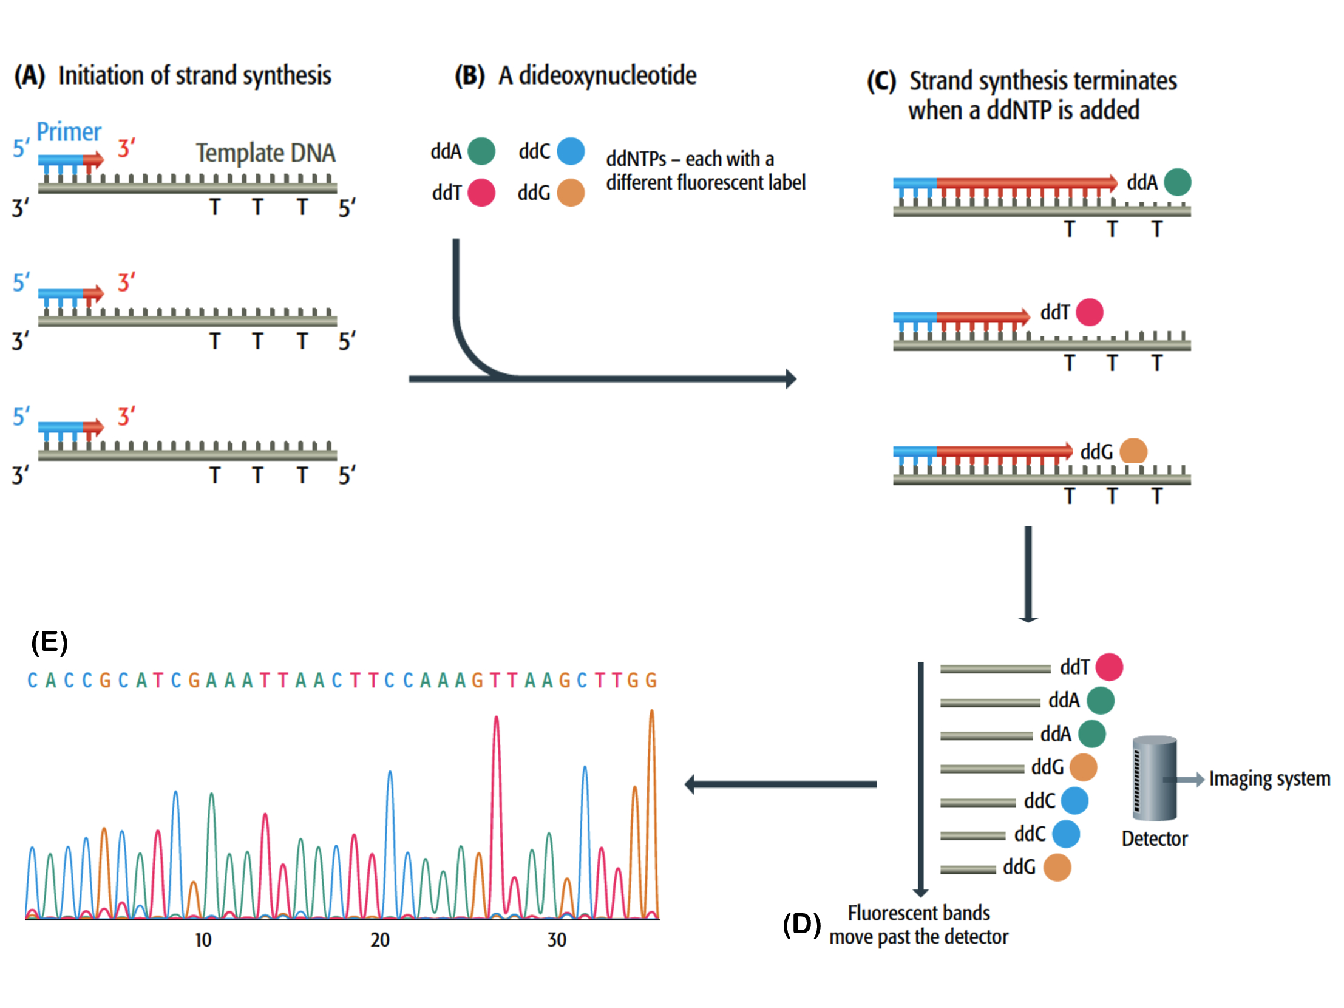 Chain termination DNA sequencing (Brown et al. 2007). (A) Use of universal primers for the synthesis of DNA complementary of a single-stranded template. (B) Incorporation of small amount of fluorescent dideoxynucleotides (ddATP, ddTTp, ddCTP and ddGTP), each with a different fluorescent label. (C) The ddNTP block the synthesis of DNA because they have a hydrogen atom rather than a hydroxyl group attached to the 3’ carbon. (D) Each labelled DNA strand passes through a polyacrylamide gel electrophoresis, migrating more or less according to their length, and after separation a fluorescent detector is capable of discriminating the labels attached to the ddNTP. (E) The information is passed to the imaging system and a sequence of DNA is printed out. The sequence is represented by a series of peaks, one for each nucleotide position.